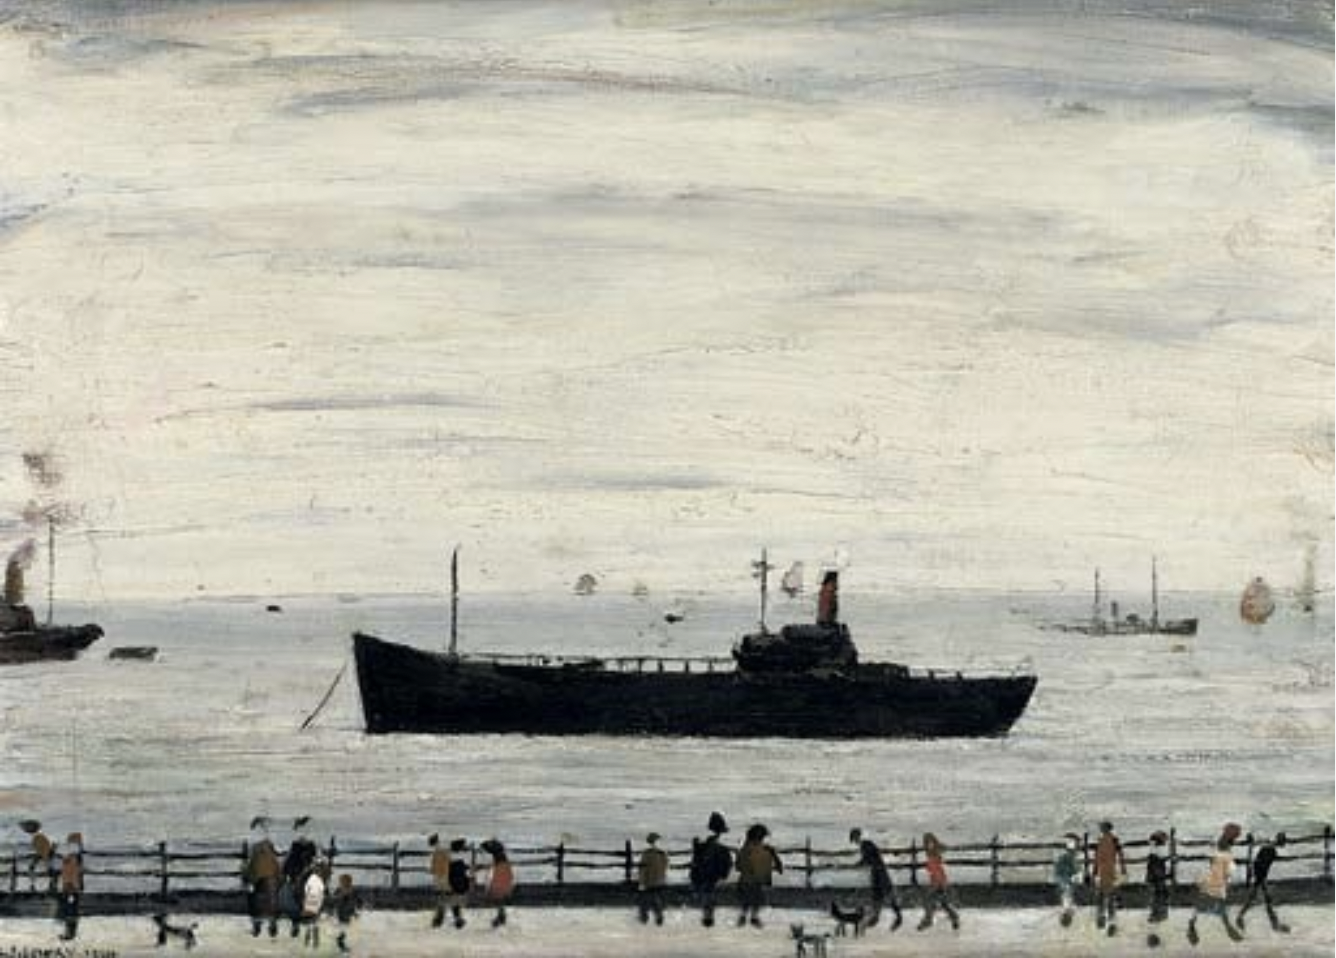 Steamer off Promenade (1964) by Laurence Stephen Lowry (1887 - 1976), English artist.